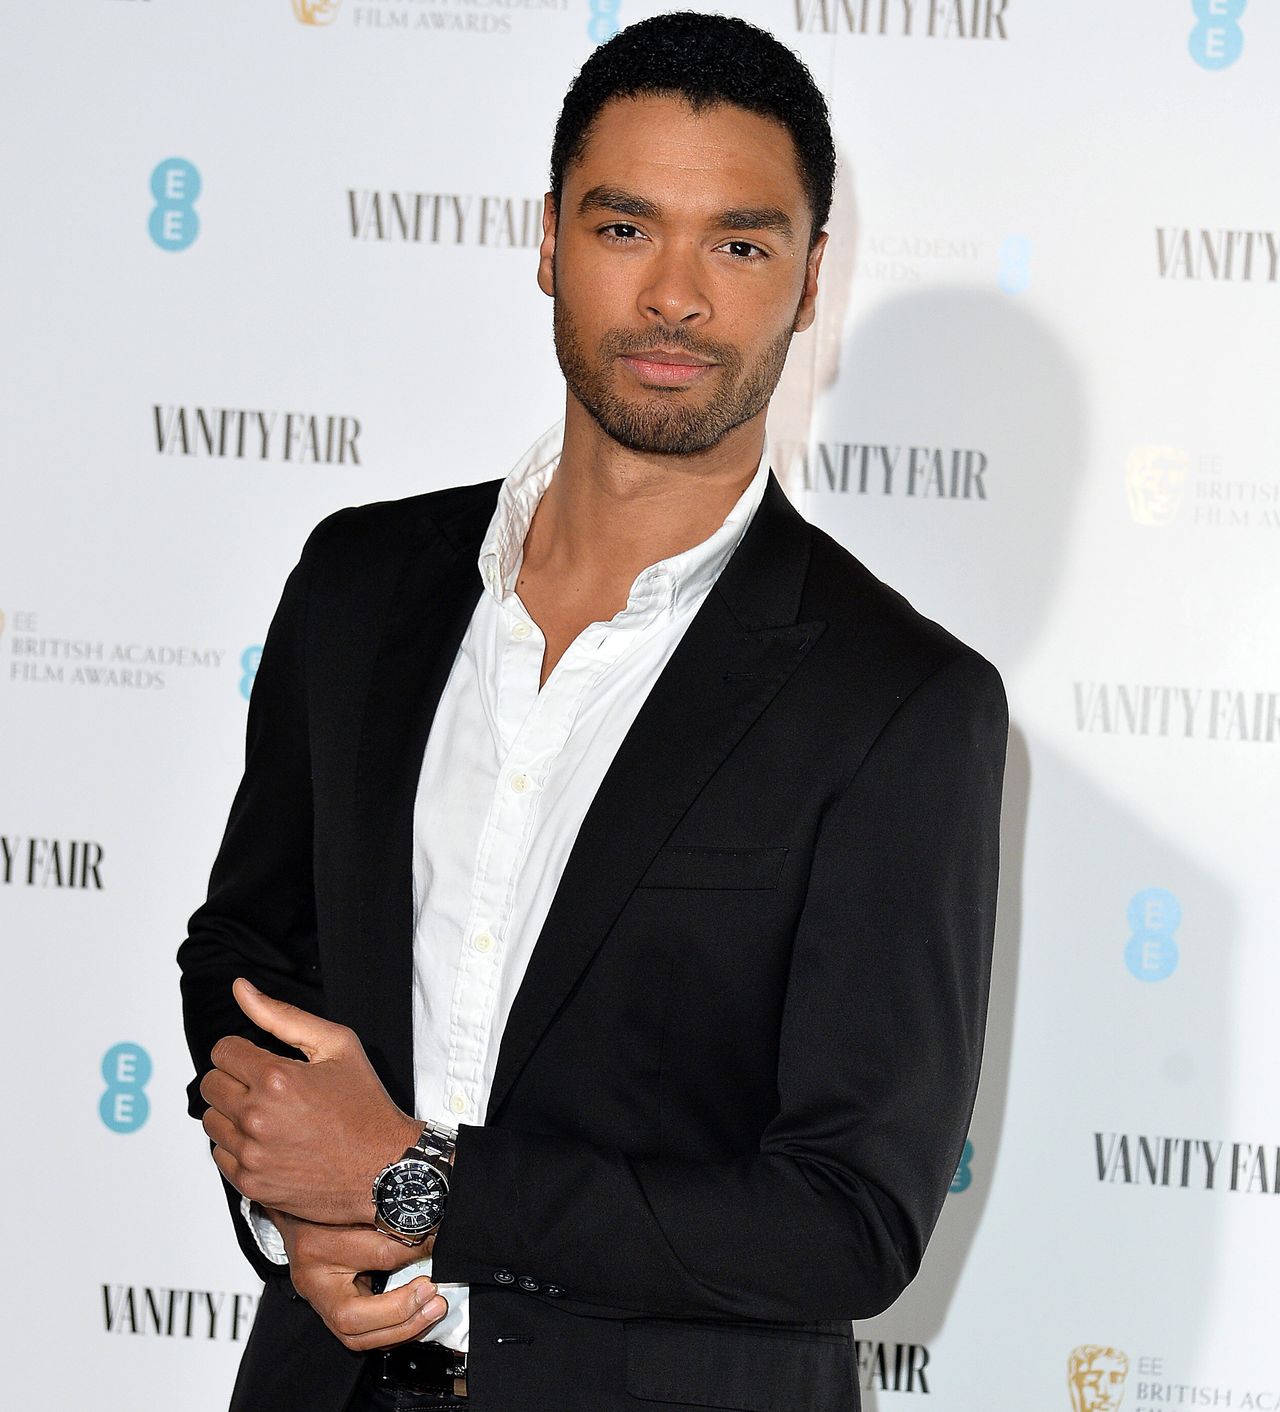 Regé-Jean Page attends the Vanity Fair EE Rising Star BAFTAs Pre Party earlier this year